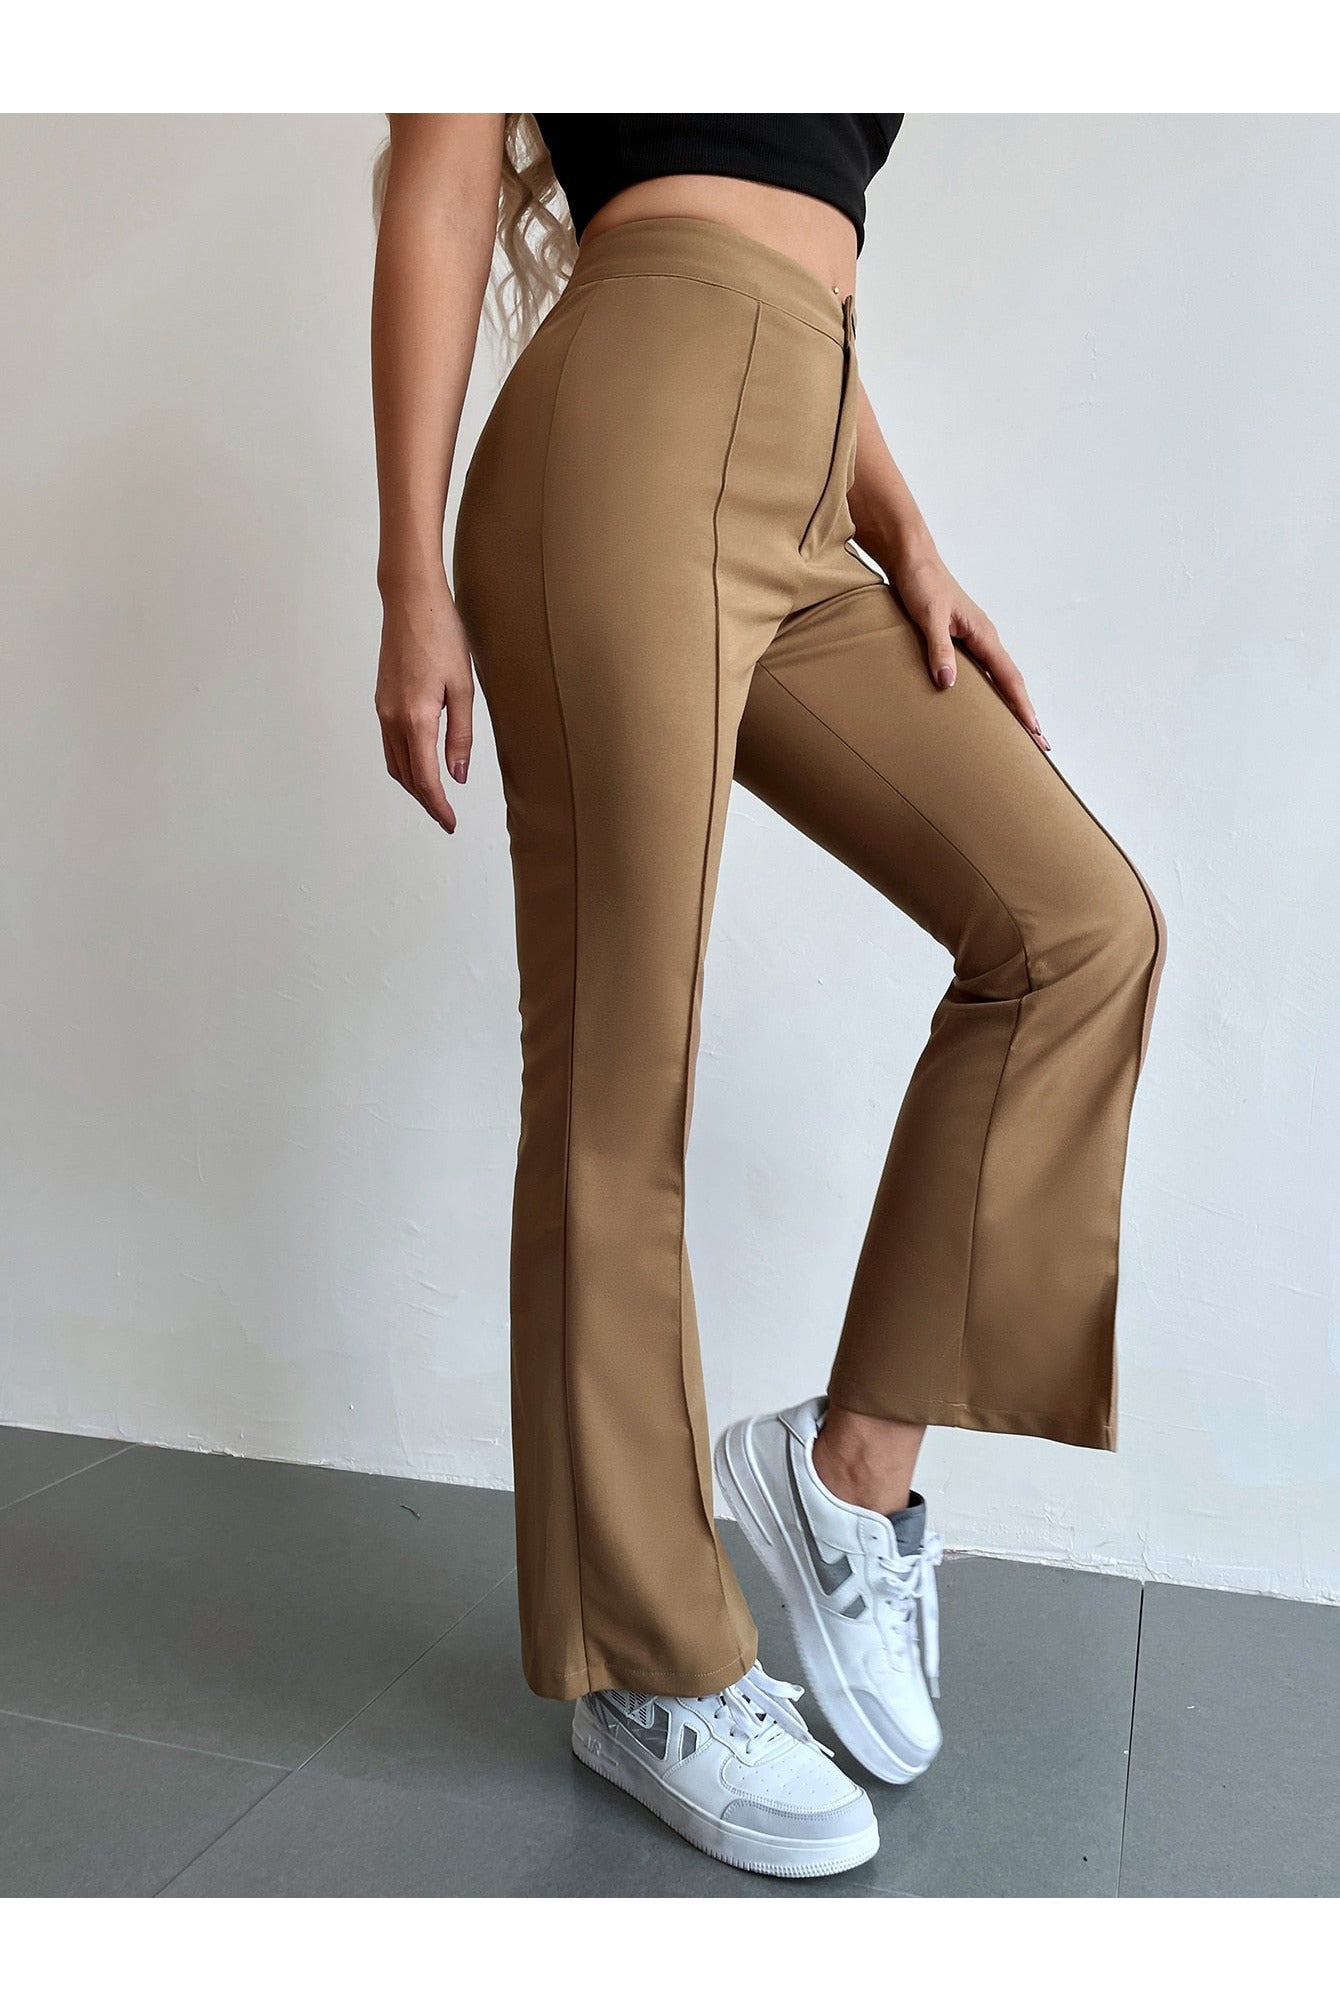 Buy Shein Seam Front High Waist Flare Leg Pants - Extra Small Brown in Pakistan